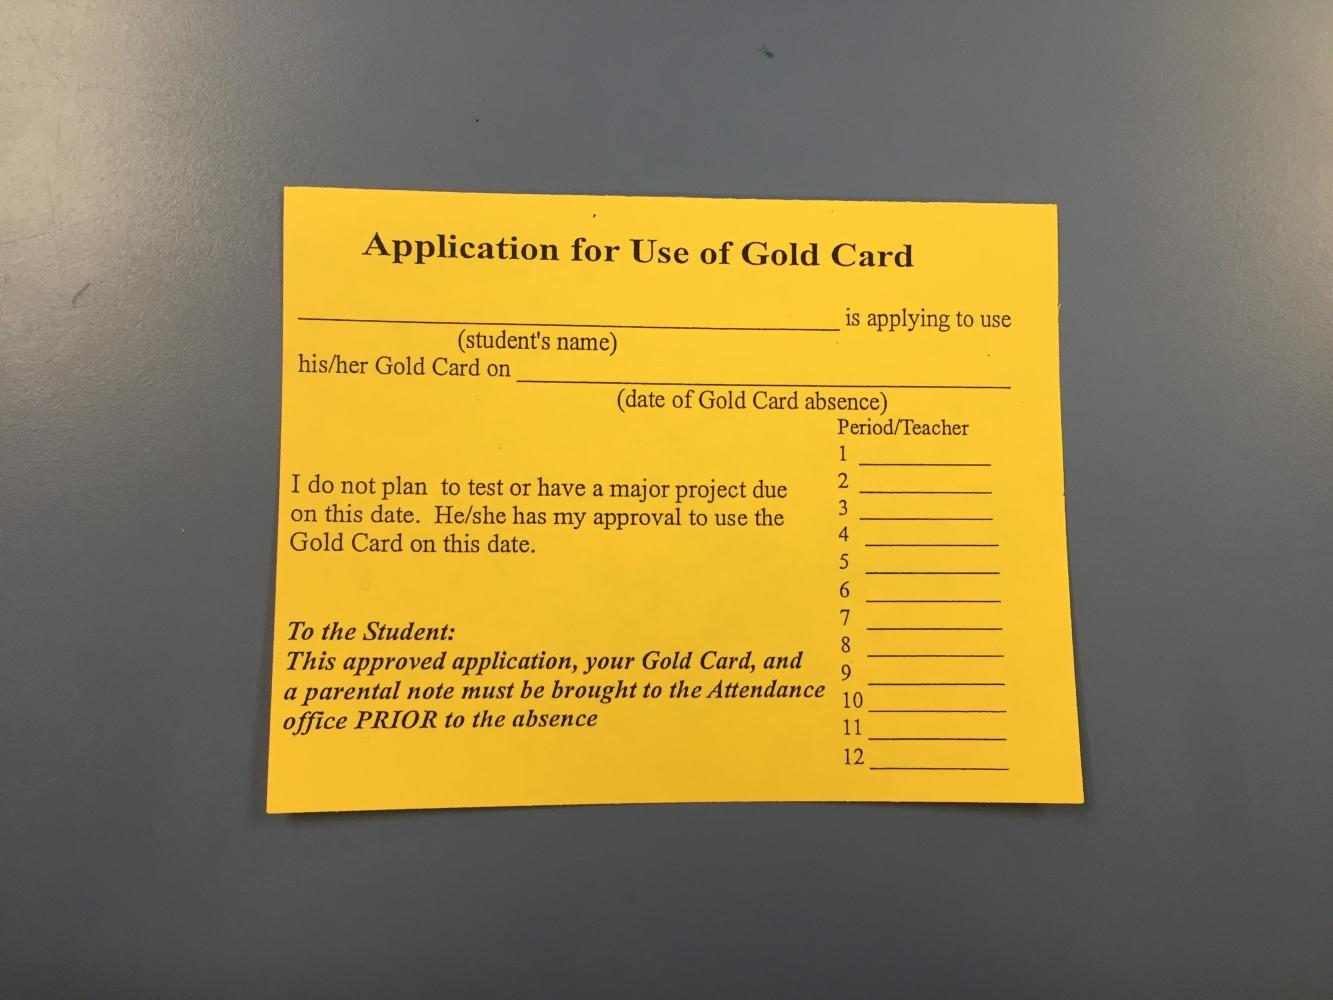 Gold Cards: Reaching for an Impossible Goal